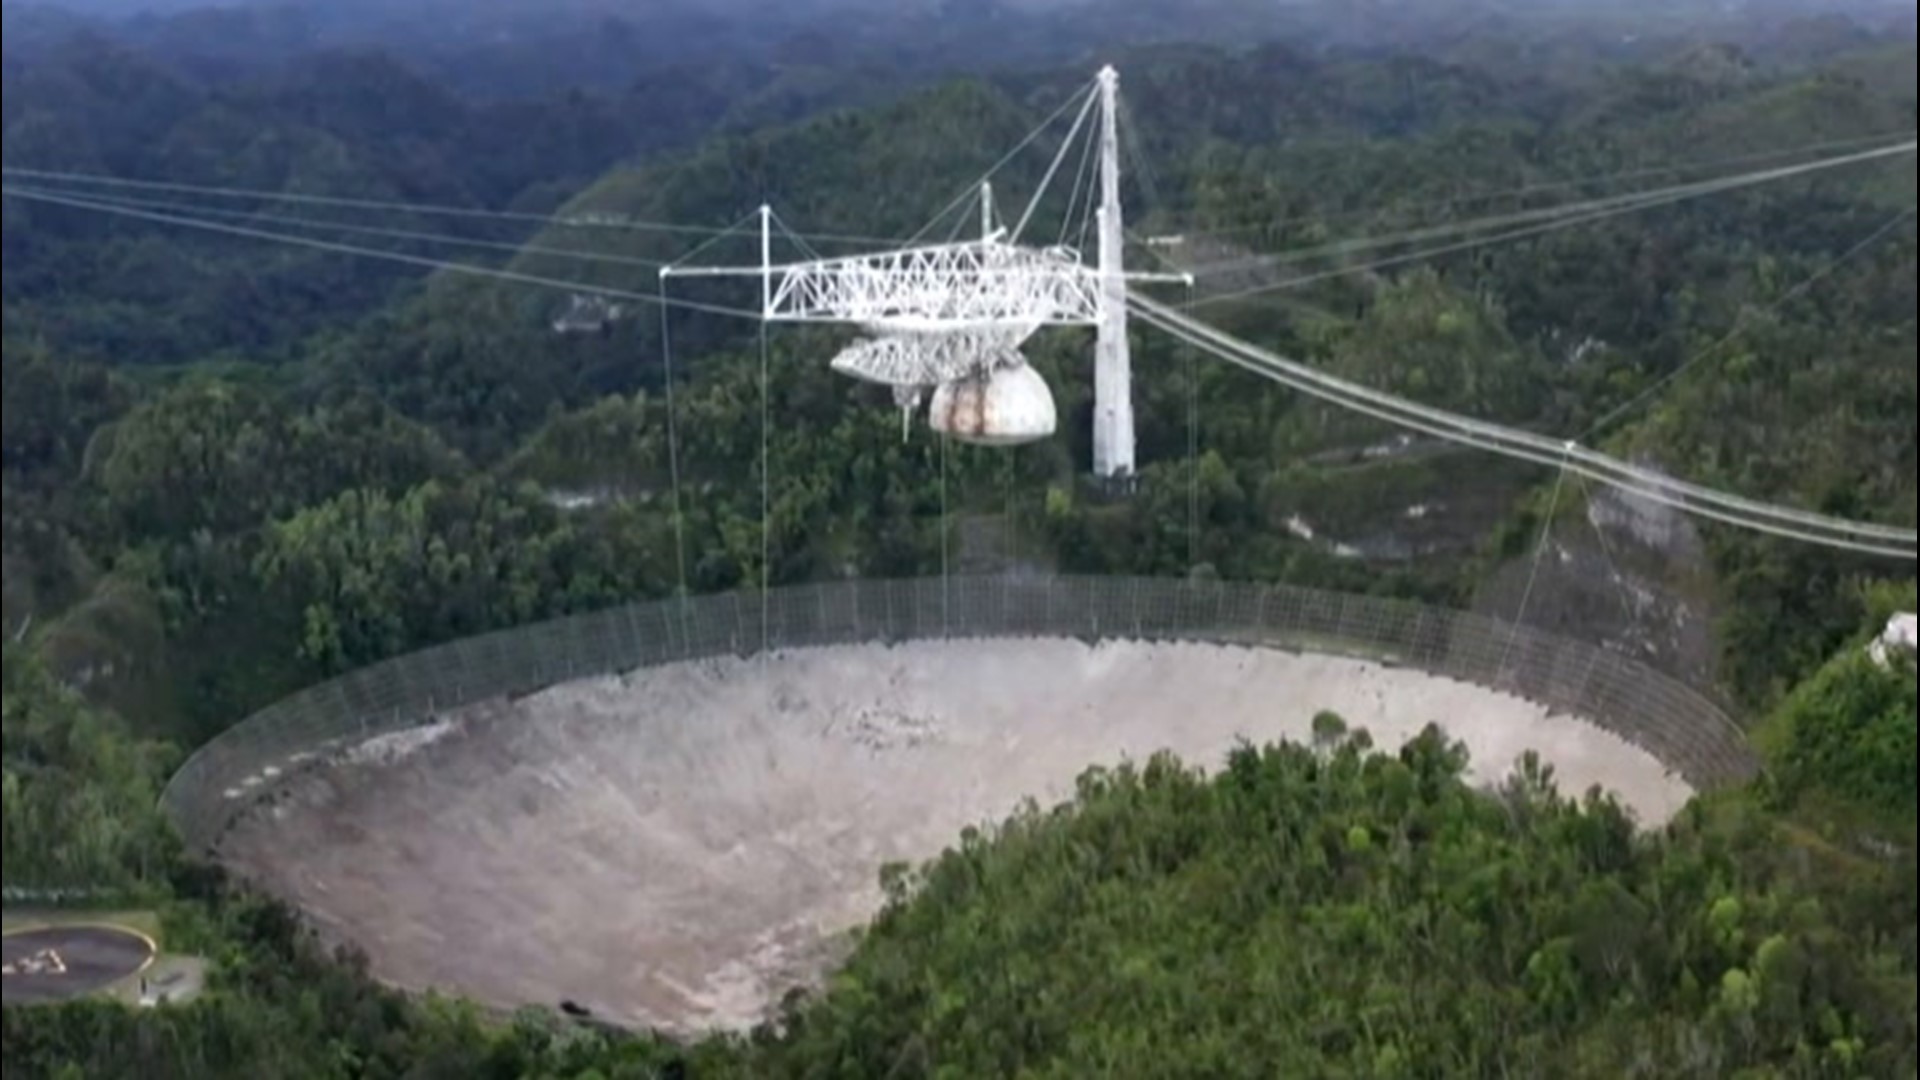 The radio telescope in Arecibo, Puerto Rico, will be decommissioned, and eventually demolished, after suffering damage from cable breaks the National Science Foundation deemed too dangerous to repair.